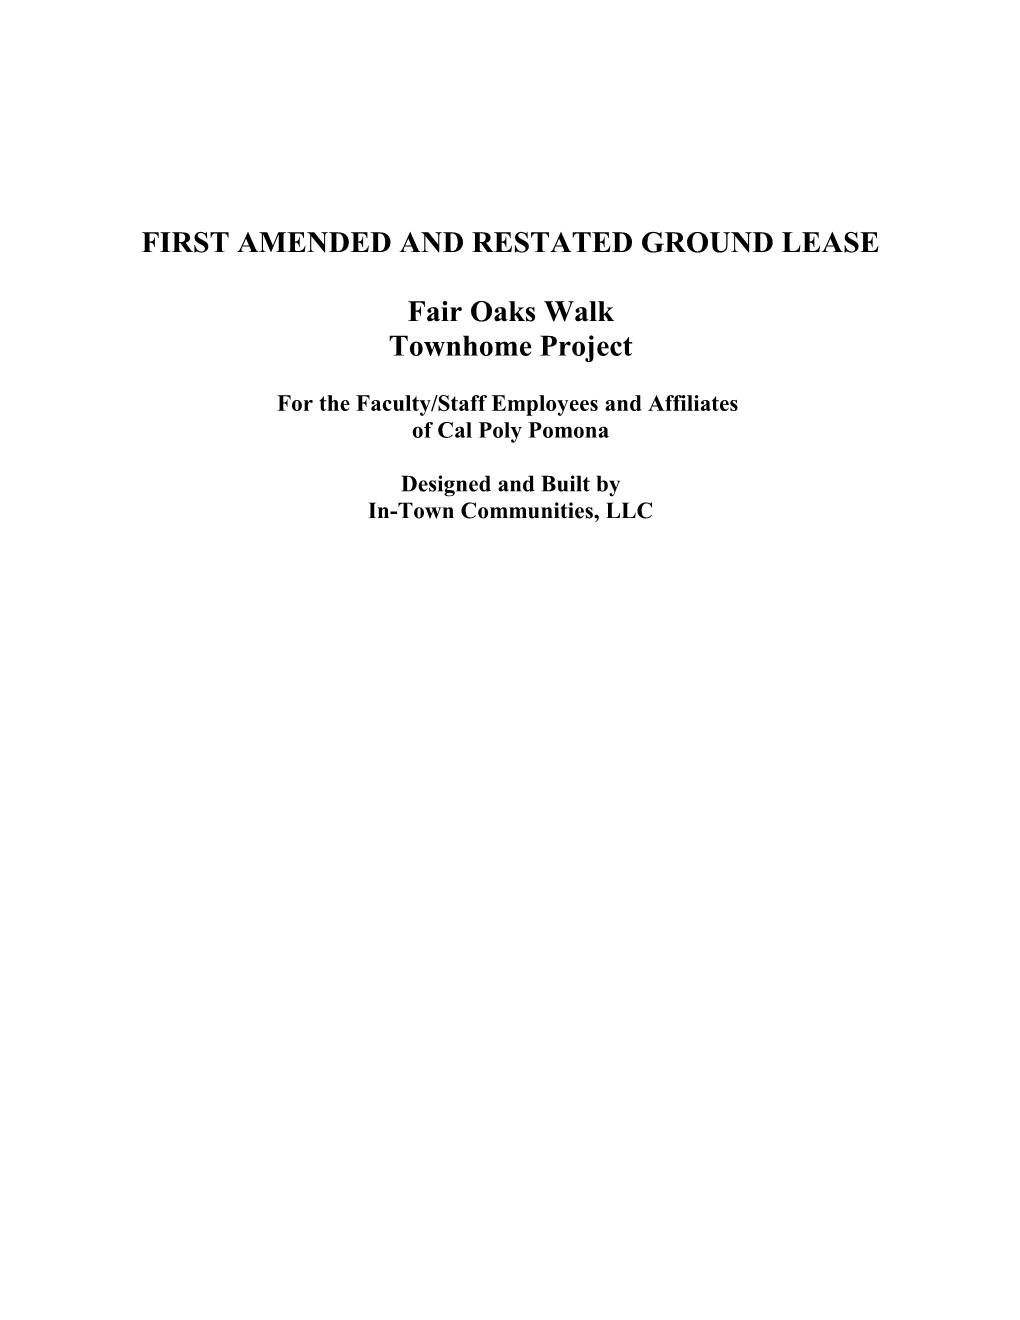 First Amended and Restated Ground Lease